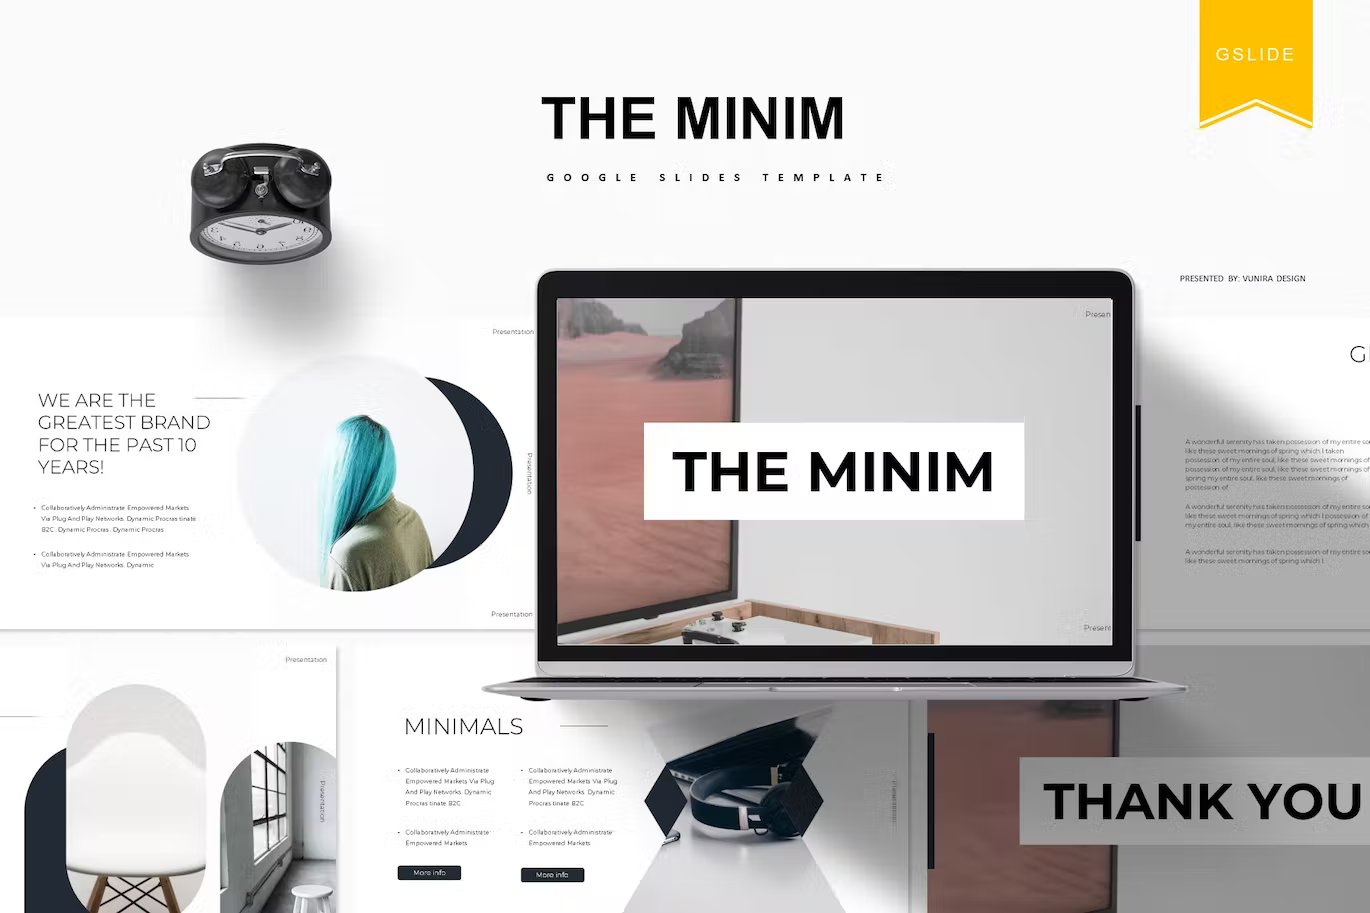 Black lettering "The Minim Google Slides Template" and different templates on a gray background.